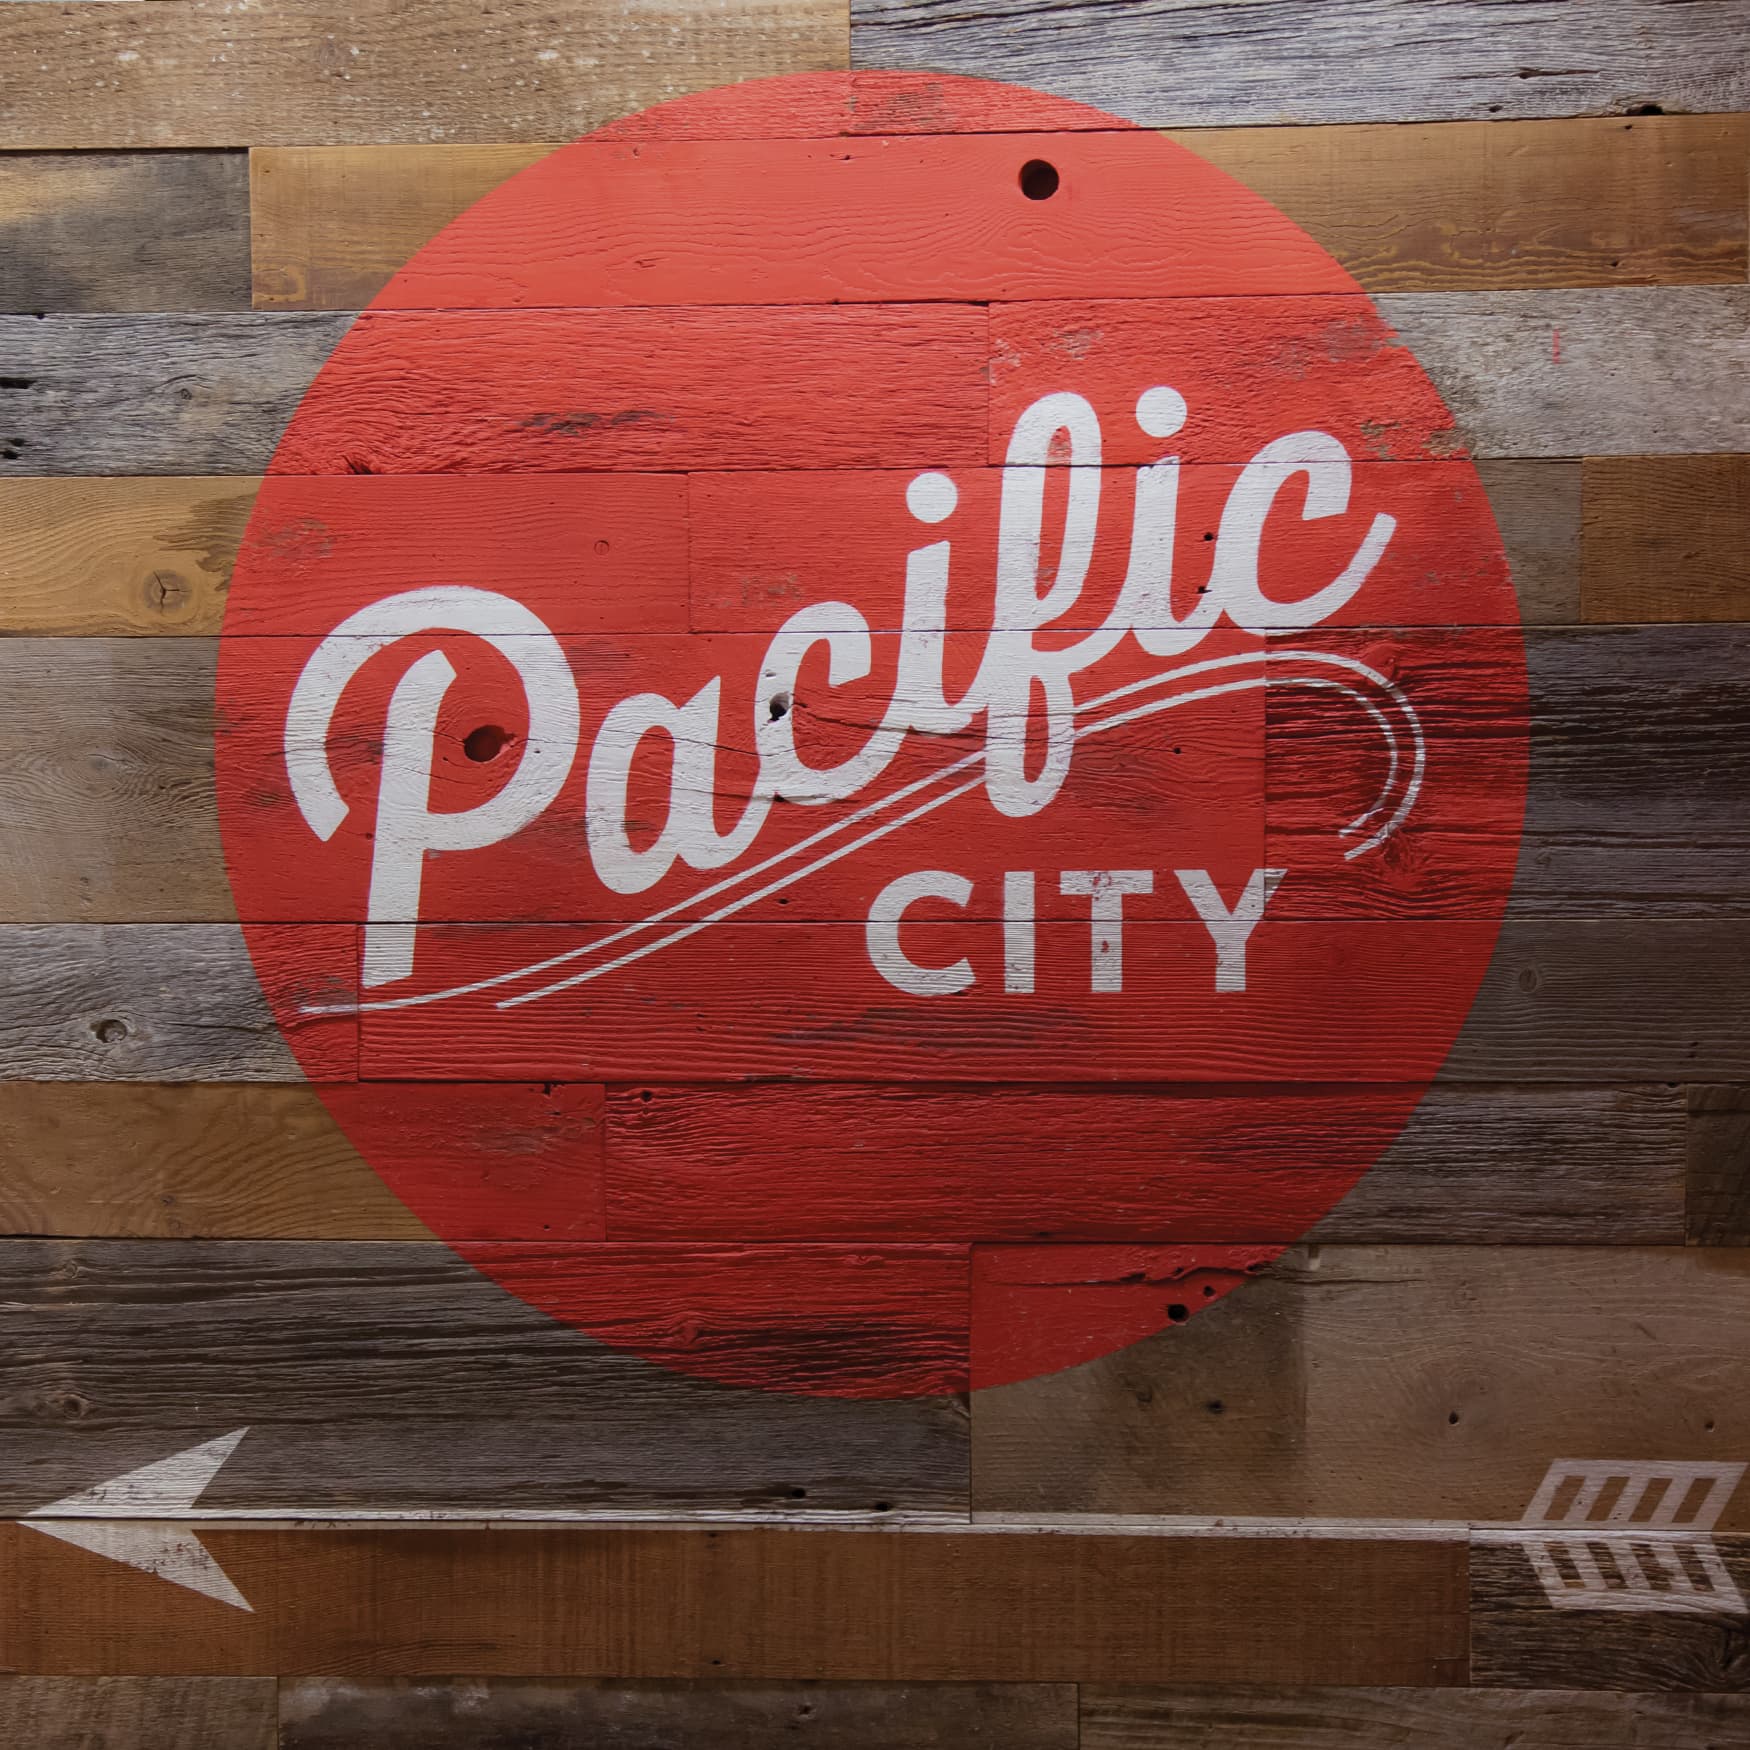 Pacific City waterfront retail project painted identity graphic